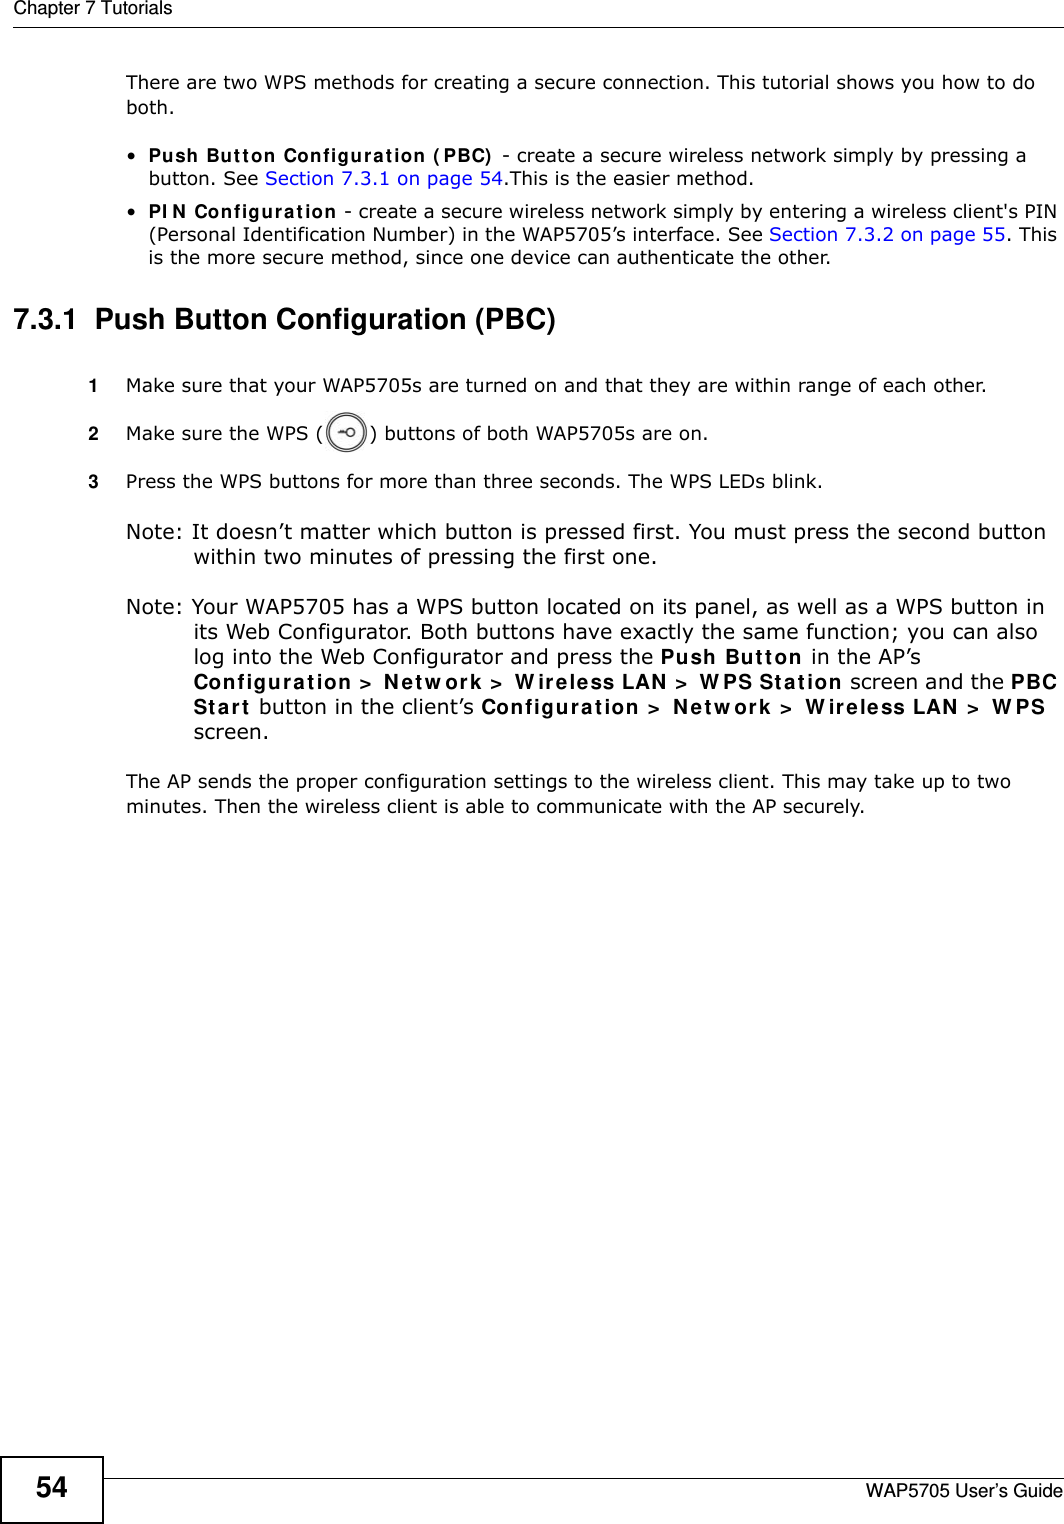 Chapter 7 TutorialsWAP5705 User’s Guide54There are two WPS methods for creating a secure connection. This tutorial shows you how to do both.•Push But t on Configurat ion  ( PBC)  - create a secure wireless network simply by pressing a button. See Section 7.3.1 on page 54.This is the easier method.•PI N  Configu rat ion - create a secure wireless network simply by entering a wireless client&apos;s PIN (Personal Identification Number) in the WAP5705’s interface. See Section 7.3.2 on page 55. This is the more secure method, since one device can authenticate the other.7.3.1  Push Button Configuration (PBC)1Make sure that your WAP5705s are turned on and that they are within range of each other. 2Make sure the WPS ( ) buttons of both WAP5705s are on.3Press the WPS buttons for more than three seconds. The WPS LEDs blink.Note: It doesn’t matter which button is pressed first. You must press the second button within two minutes of pressing the first one.  Note: Your WAP5705 has a WPS button located on its panel, as well as a WPS button in its Web Configurator. Both buttons have exactly the same function; you can also log into the Web Configurator and press the Push But t on in the AP’s Configu r at ion &gt;  N e tw or k  &gt;  W ir eless LAN  &gt;  W PS St a tion screen and the PBC St a rt  button in the client’s Configurat ion &gt;  N et w ork  &gt;  W ir e le ss LAN  &gt;  W PS screen.The AP sends the proper configuration settings to the wireless client. This may take up to two minutes. Then the wireless client is able to communicate with the AP securely. 